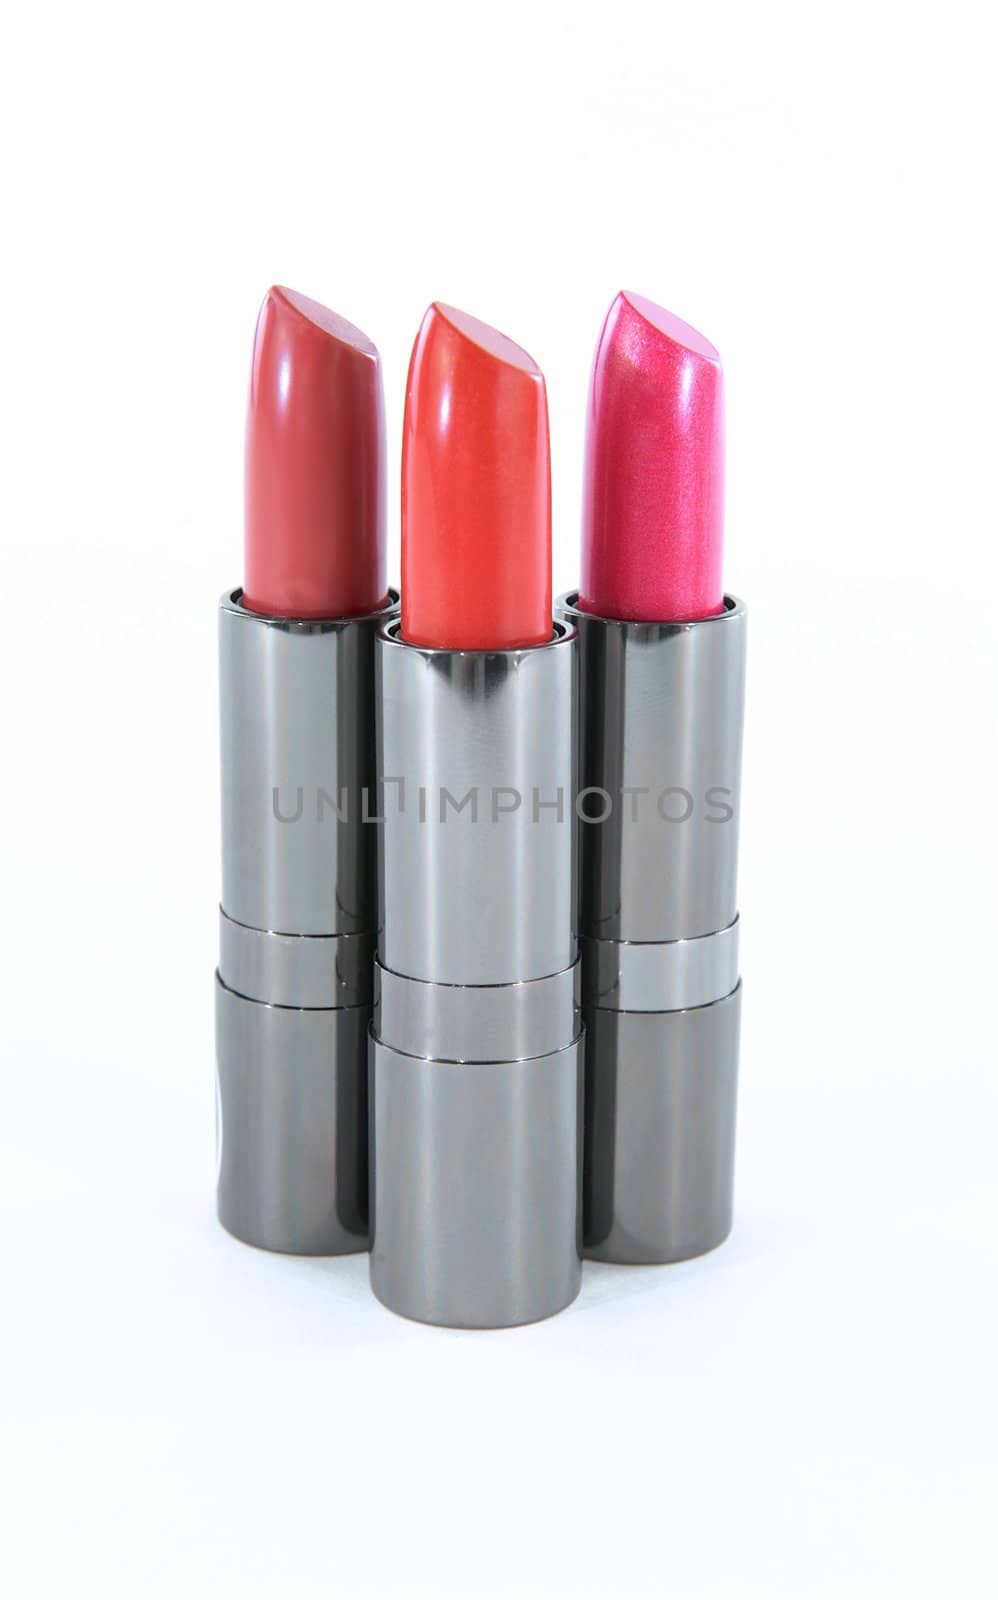 Three lipstick containers without their lids isolated on a white background